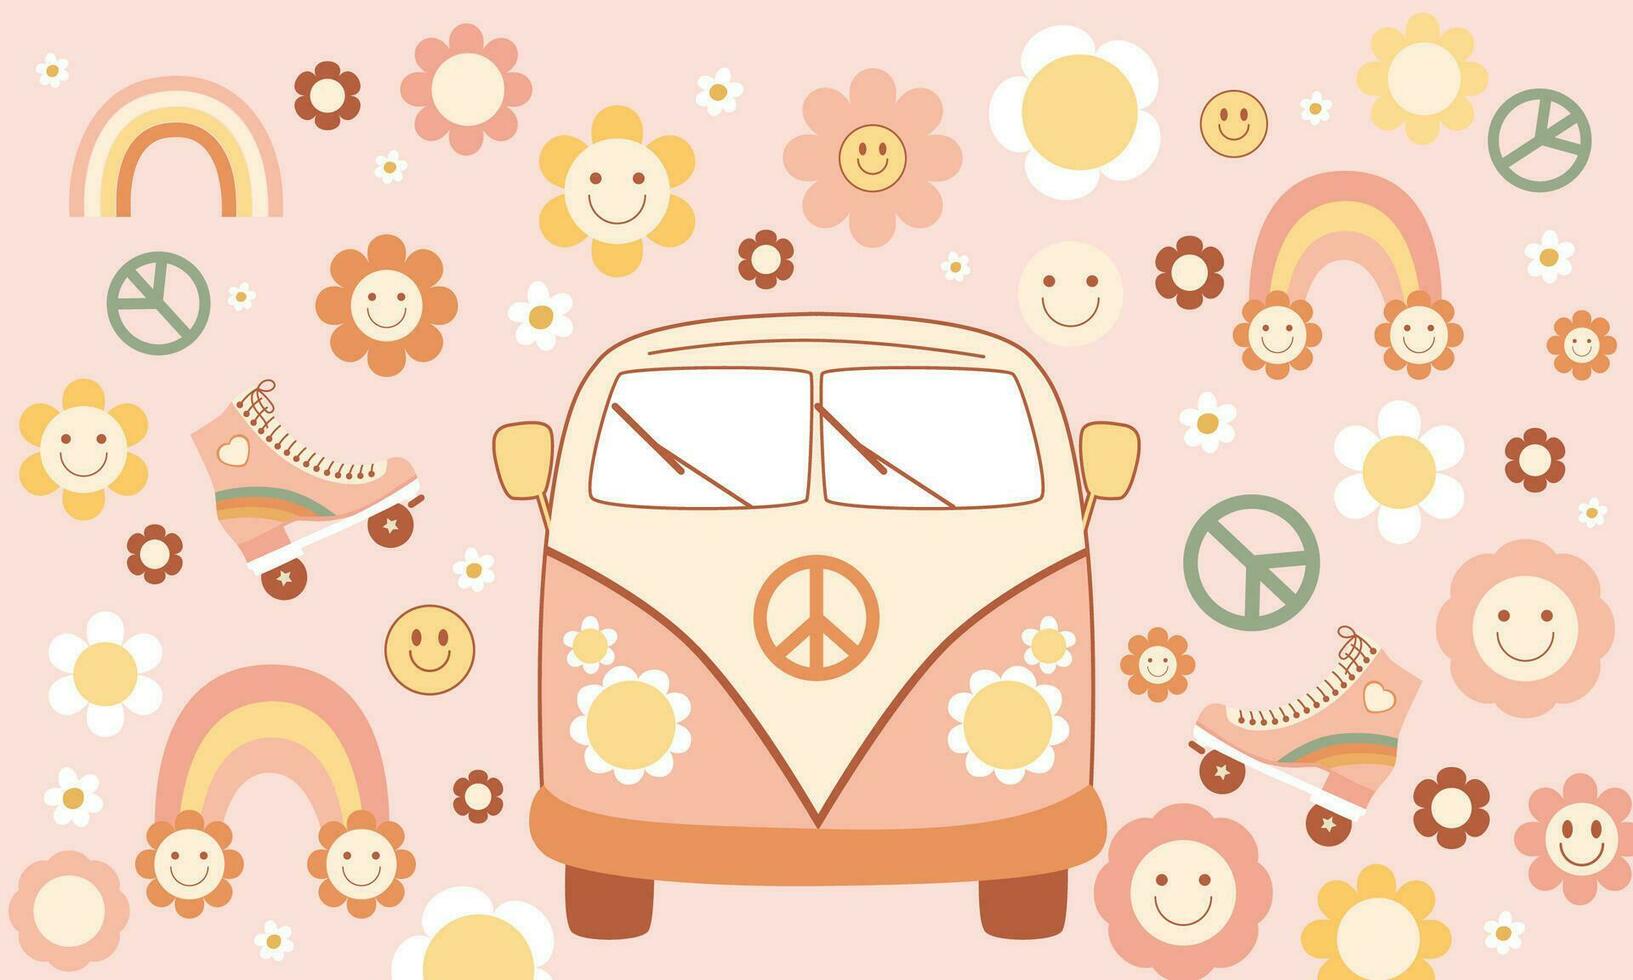 Baby groovy background with retro vintage car, minivan, roller skates, smiling flowers, daisy, rainbow, peace symbol. Vector design, 70s cute wallpaper for kids in pastel pink color.